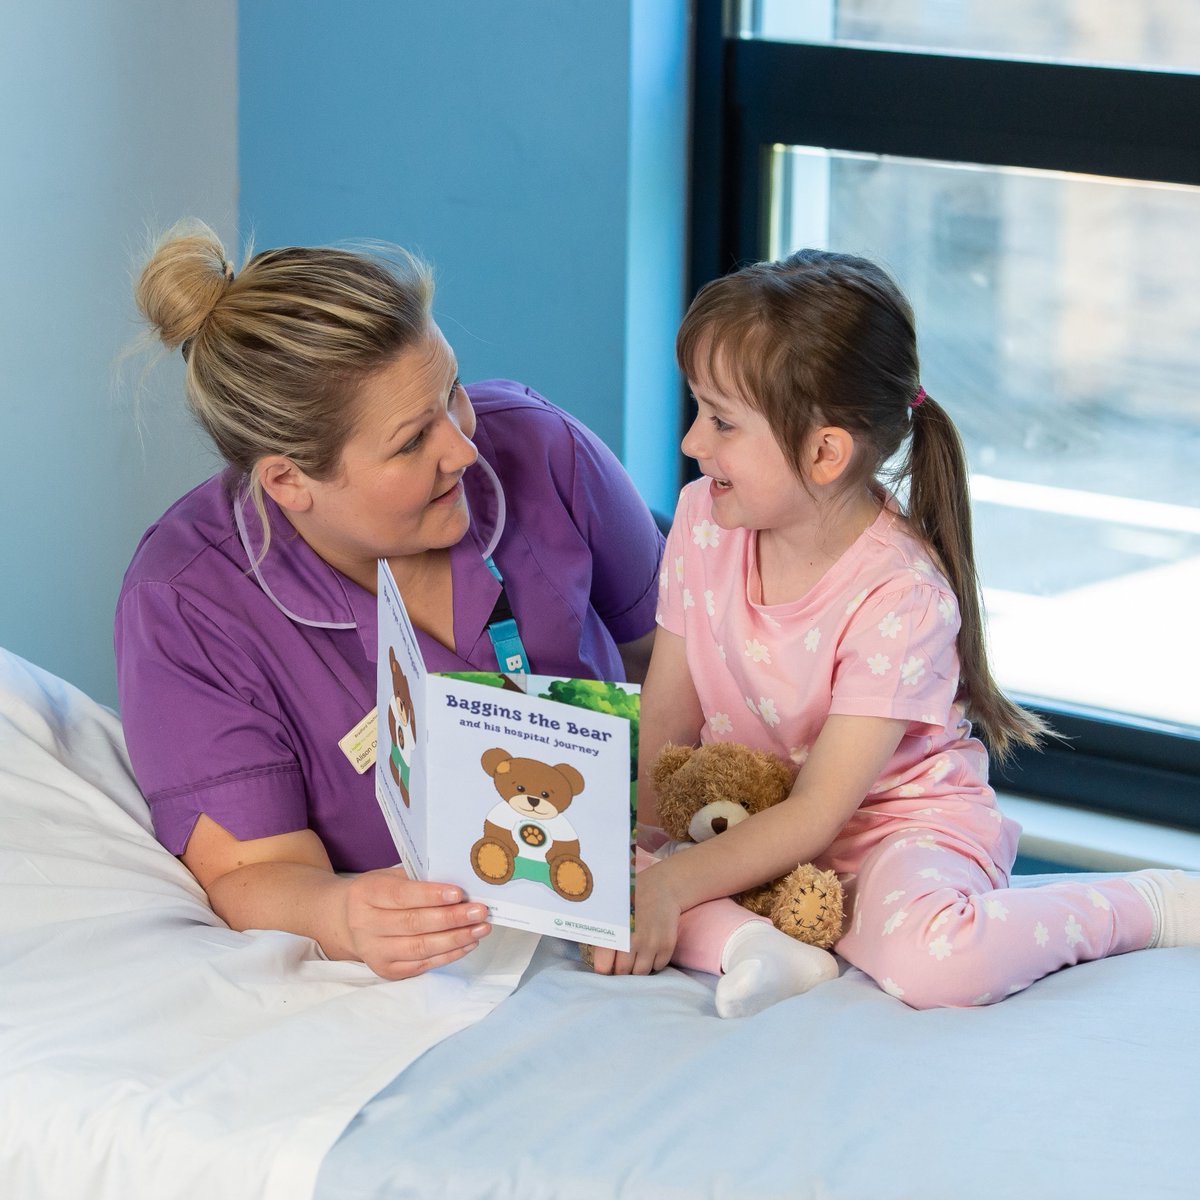 Baggins the Bear for young patients at BRI 🧸 Thanks to @BTHFTCharity, kids aged 3-11 having surgery will get: 💌 Personal letter from Baggins 🎬 Animated film 🧸 Baggins toy & booklet 🐻 Photo op 🖼️ Distraction poster 📜 Bravery certificate Donate at buff.ly/49HZg9P